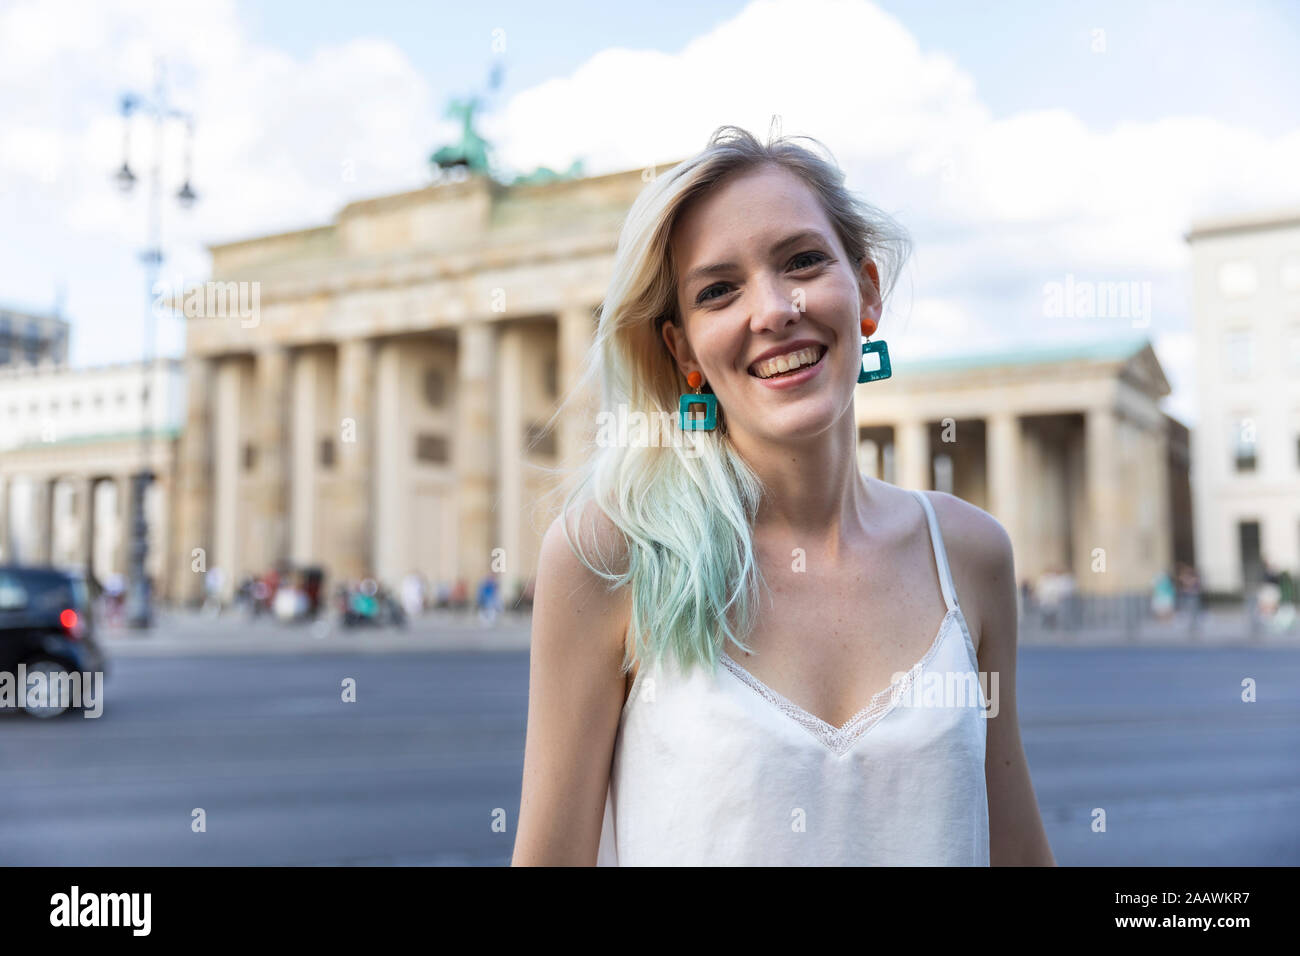 Portrait of smiling young woman in front of Brandenburger Tor, Berlin, Allemagne Banque D'Images